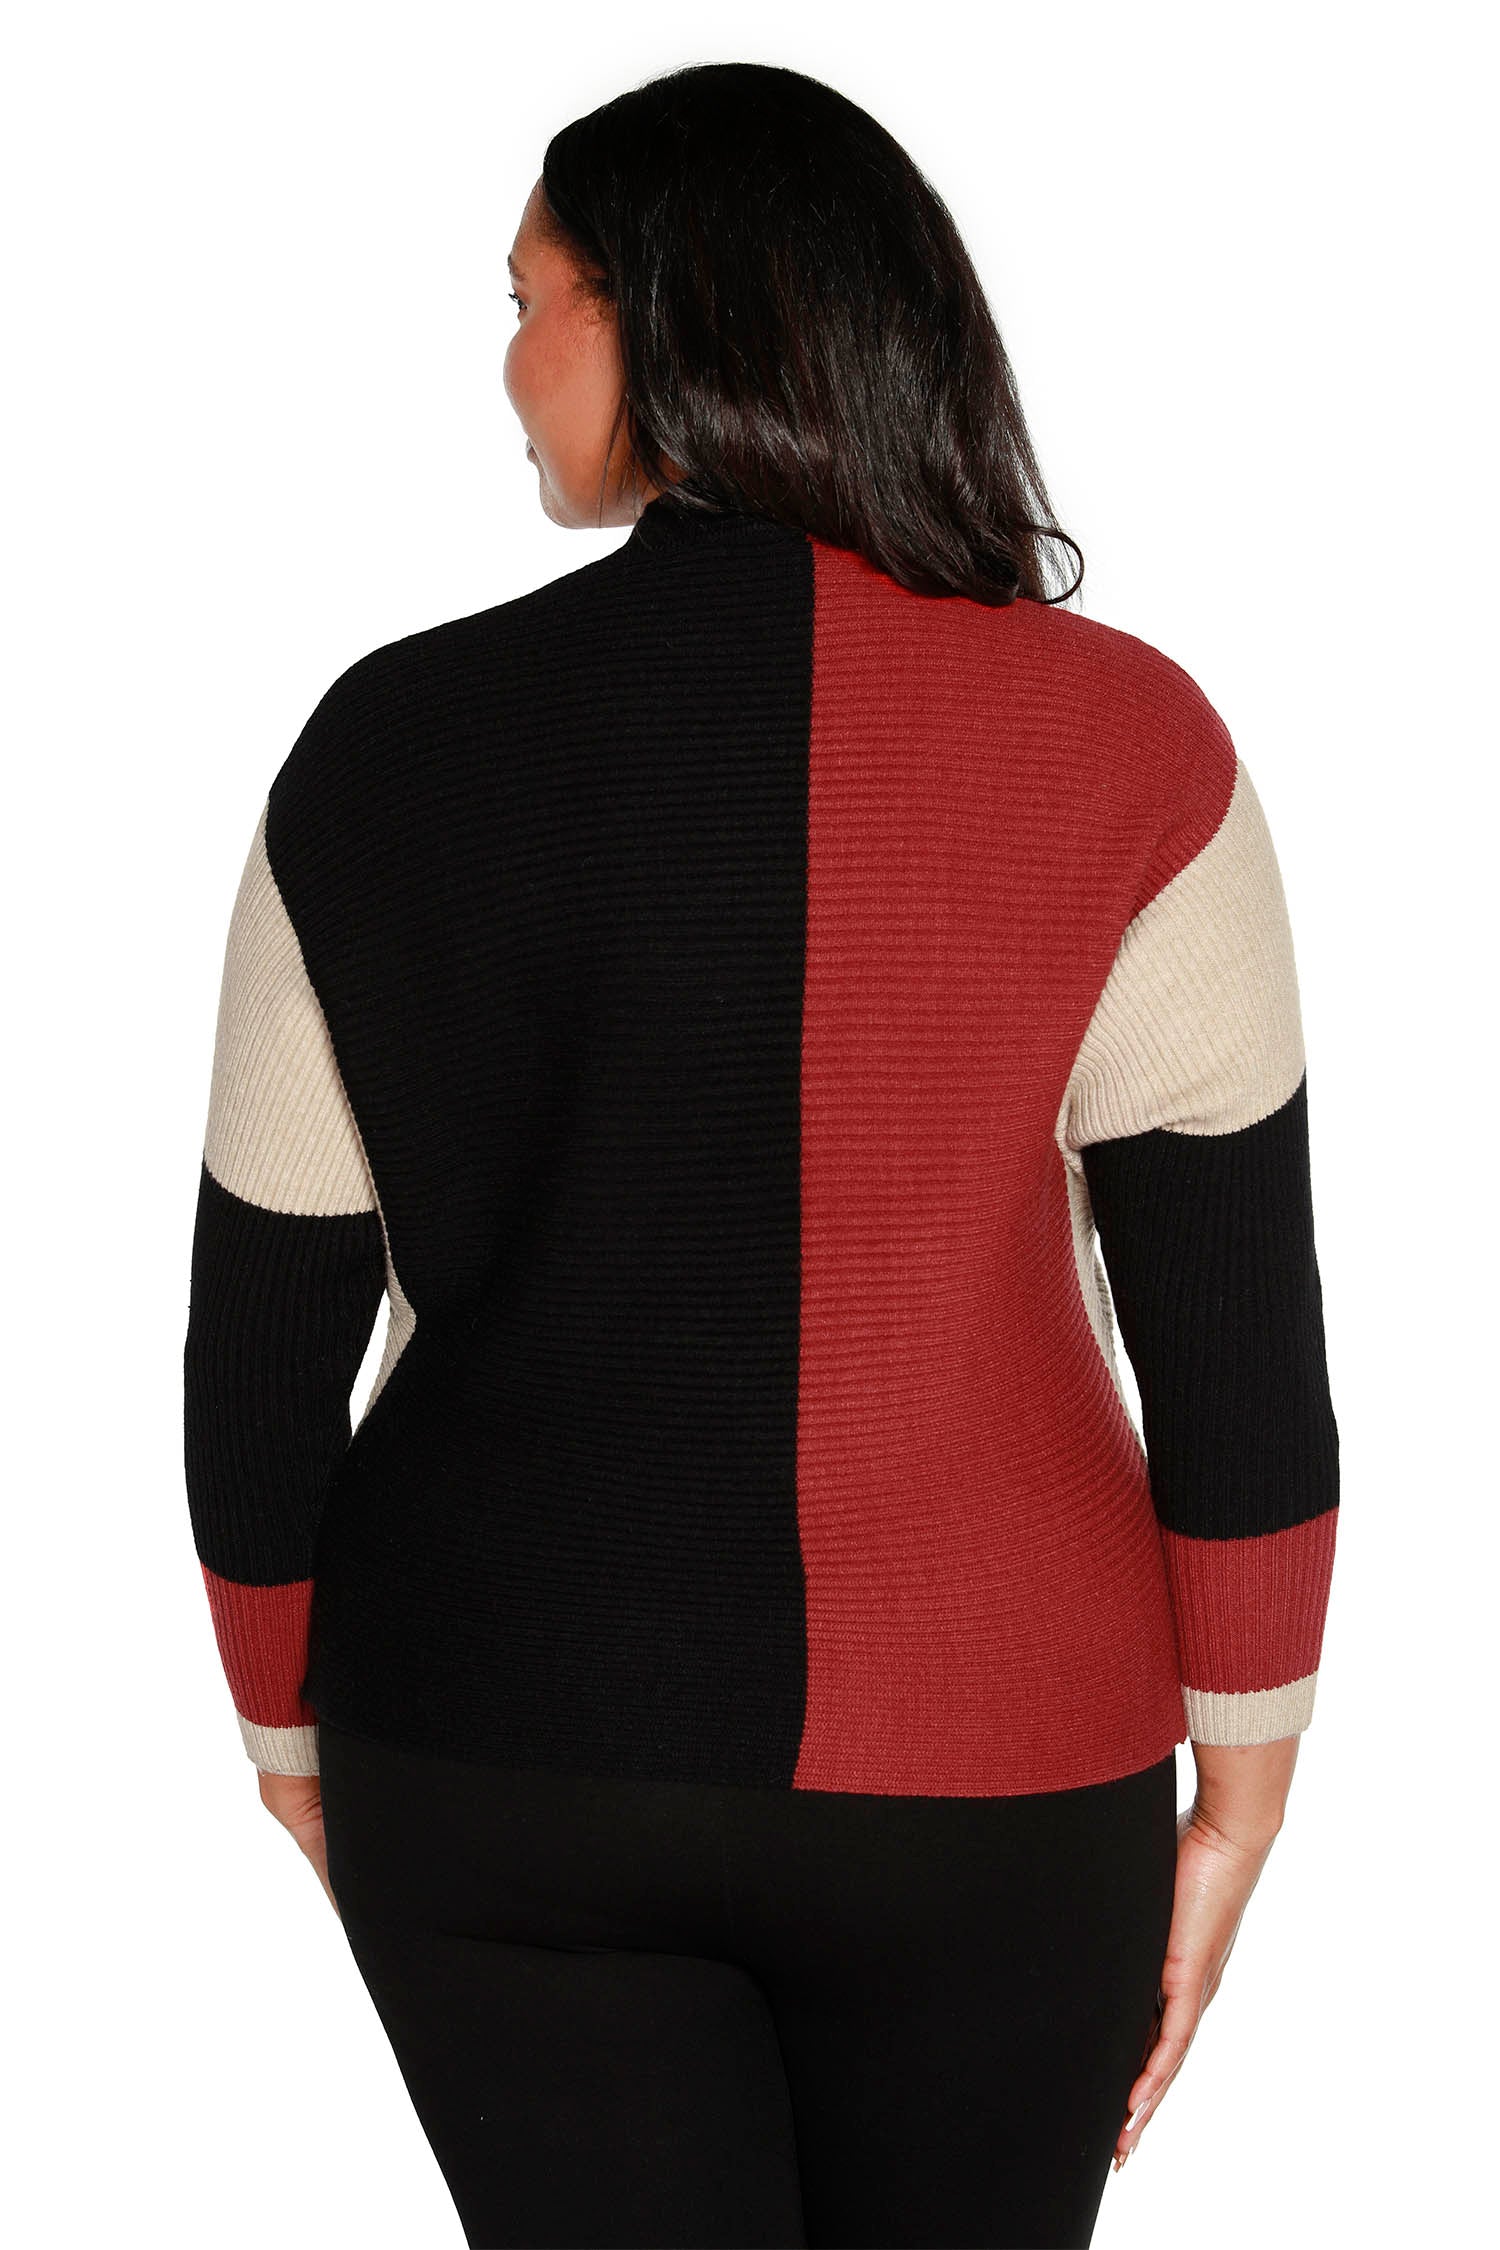 Women's Color Block Pullover Sweater with a Mock Neck | Curvy